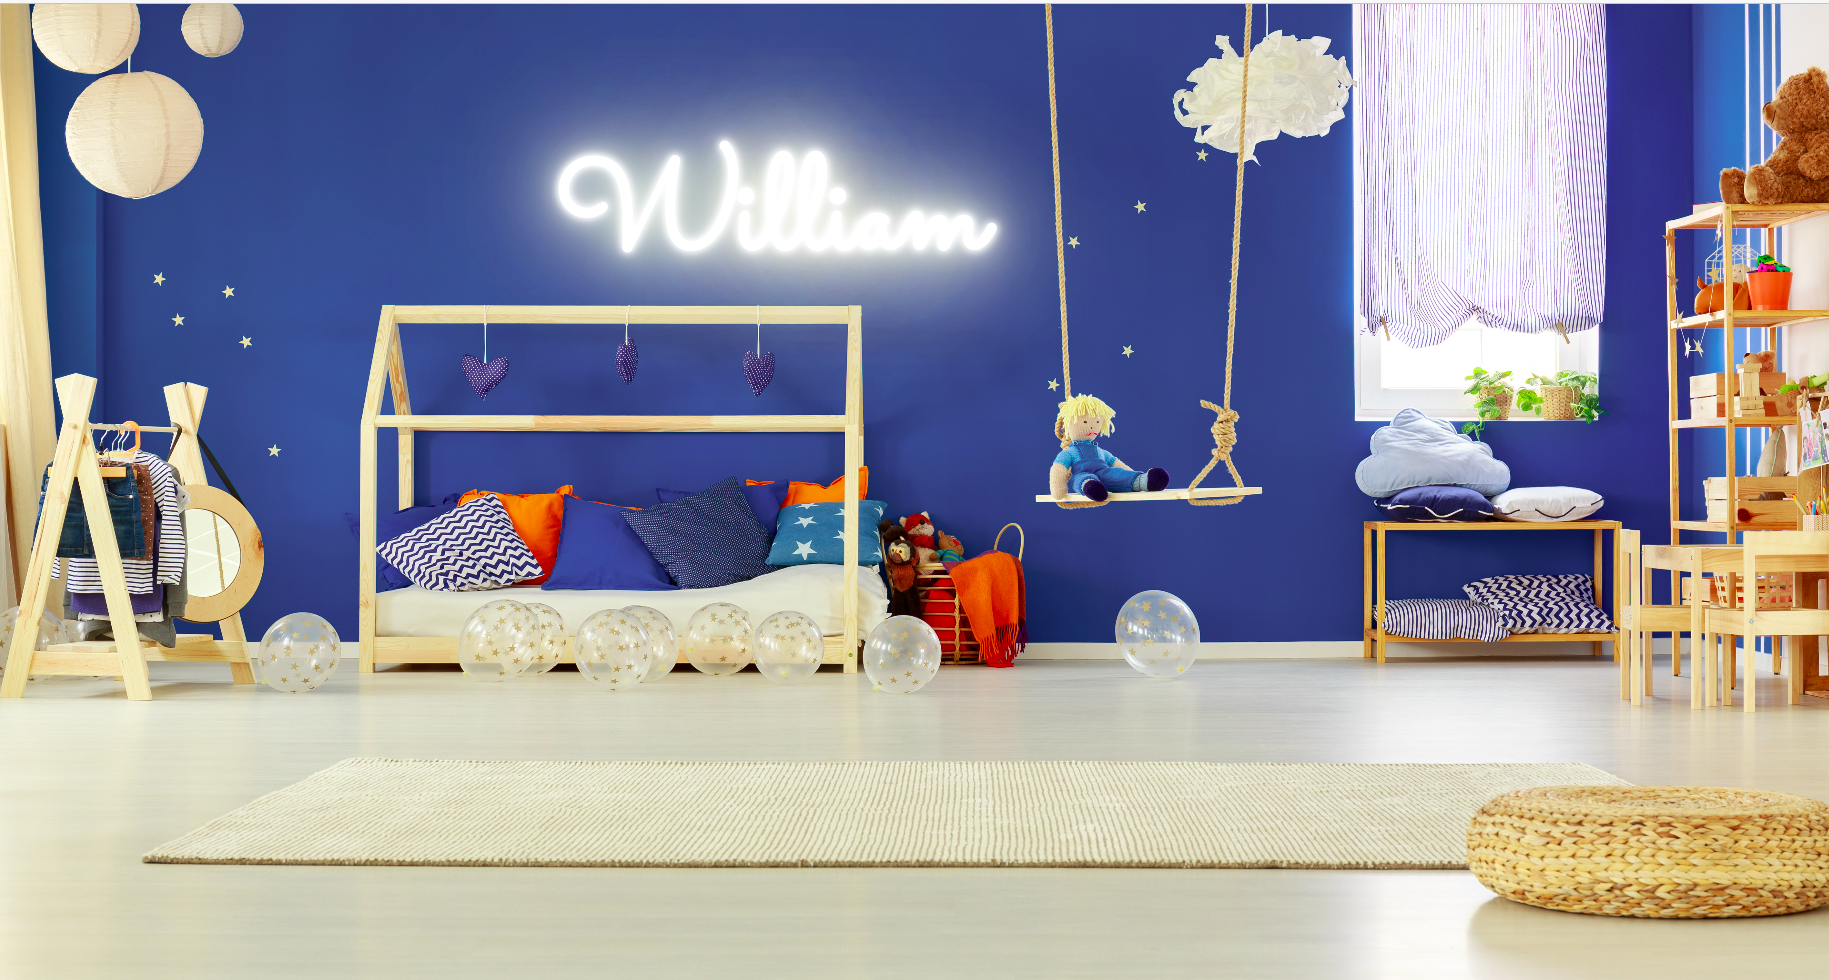 "William " Baby Name LED Neon Sign